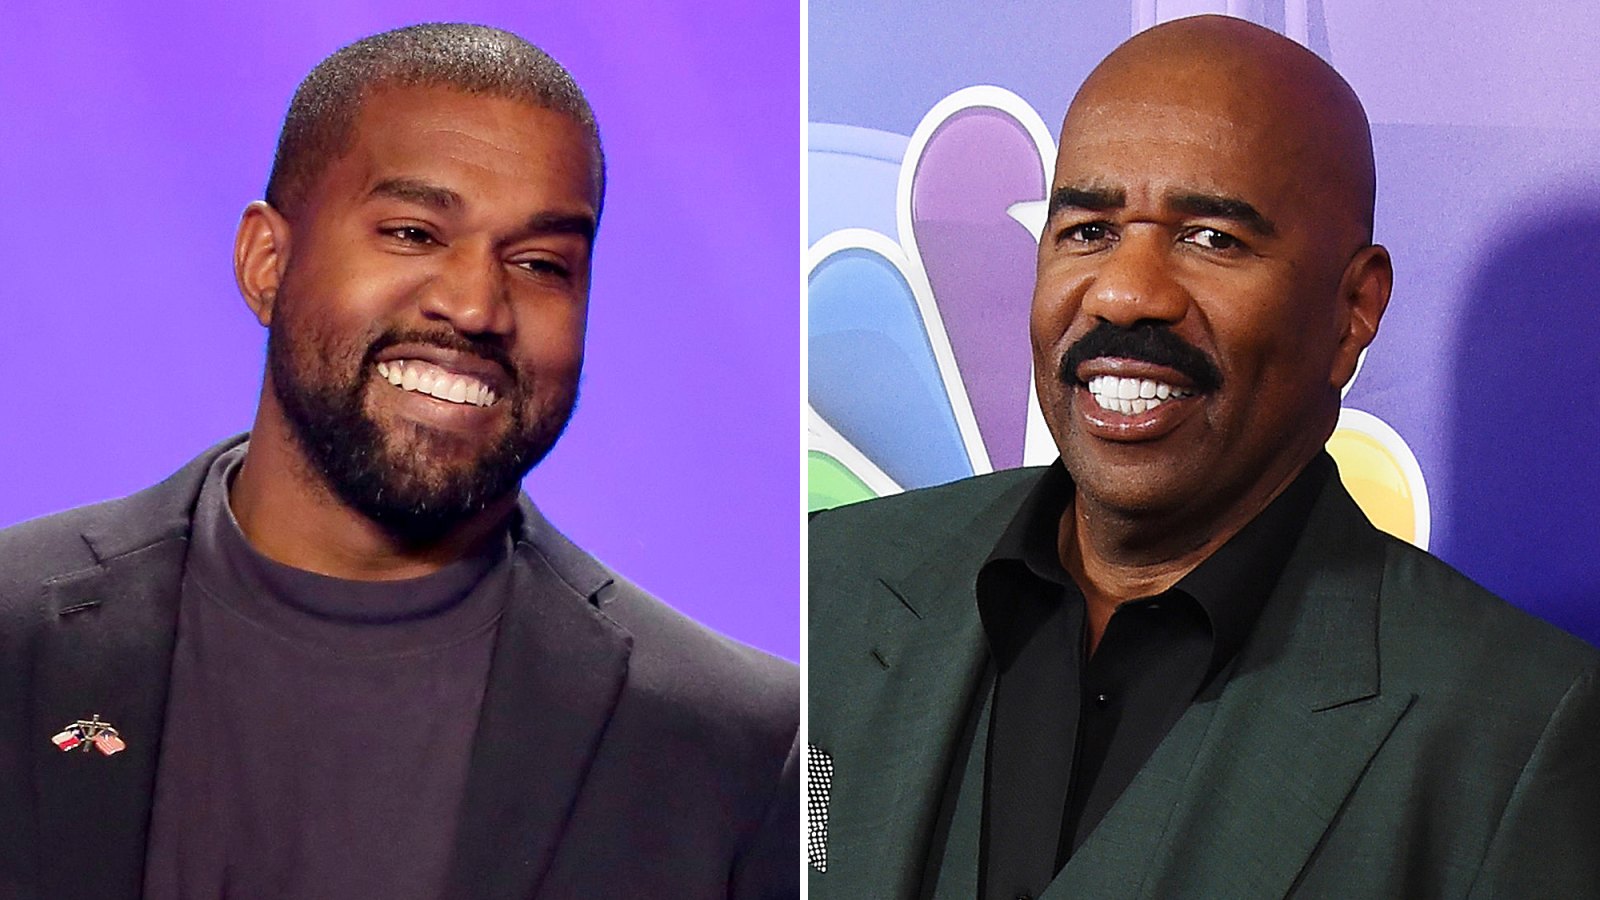 Kanye West Hangs Out With Steve Harvey After Family Drama Public Antics